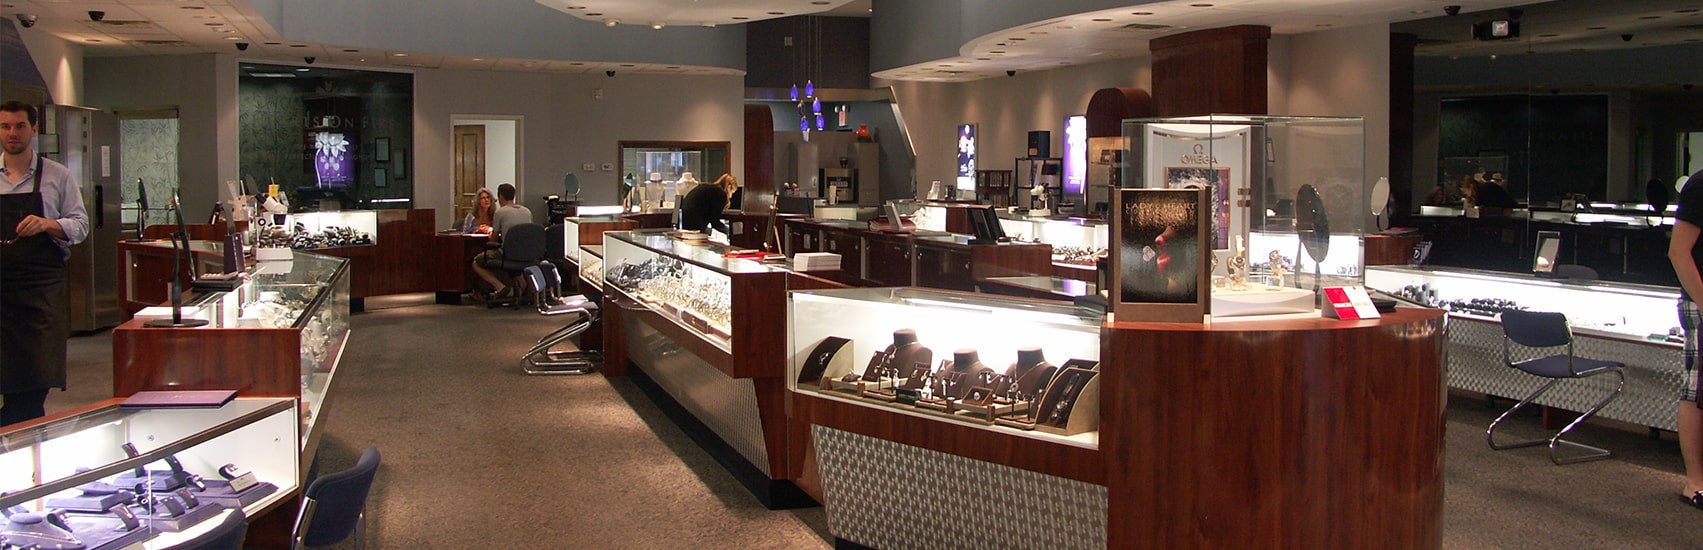 A Beautiful Shot of the Long Jewelers Boutique with Soft Lighting and Lots of Customers